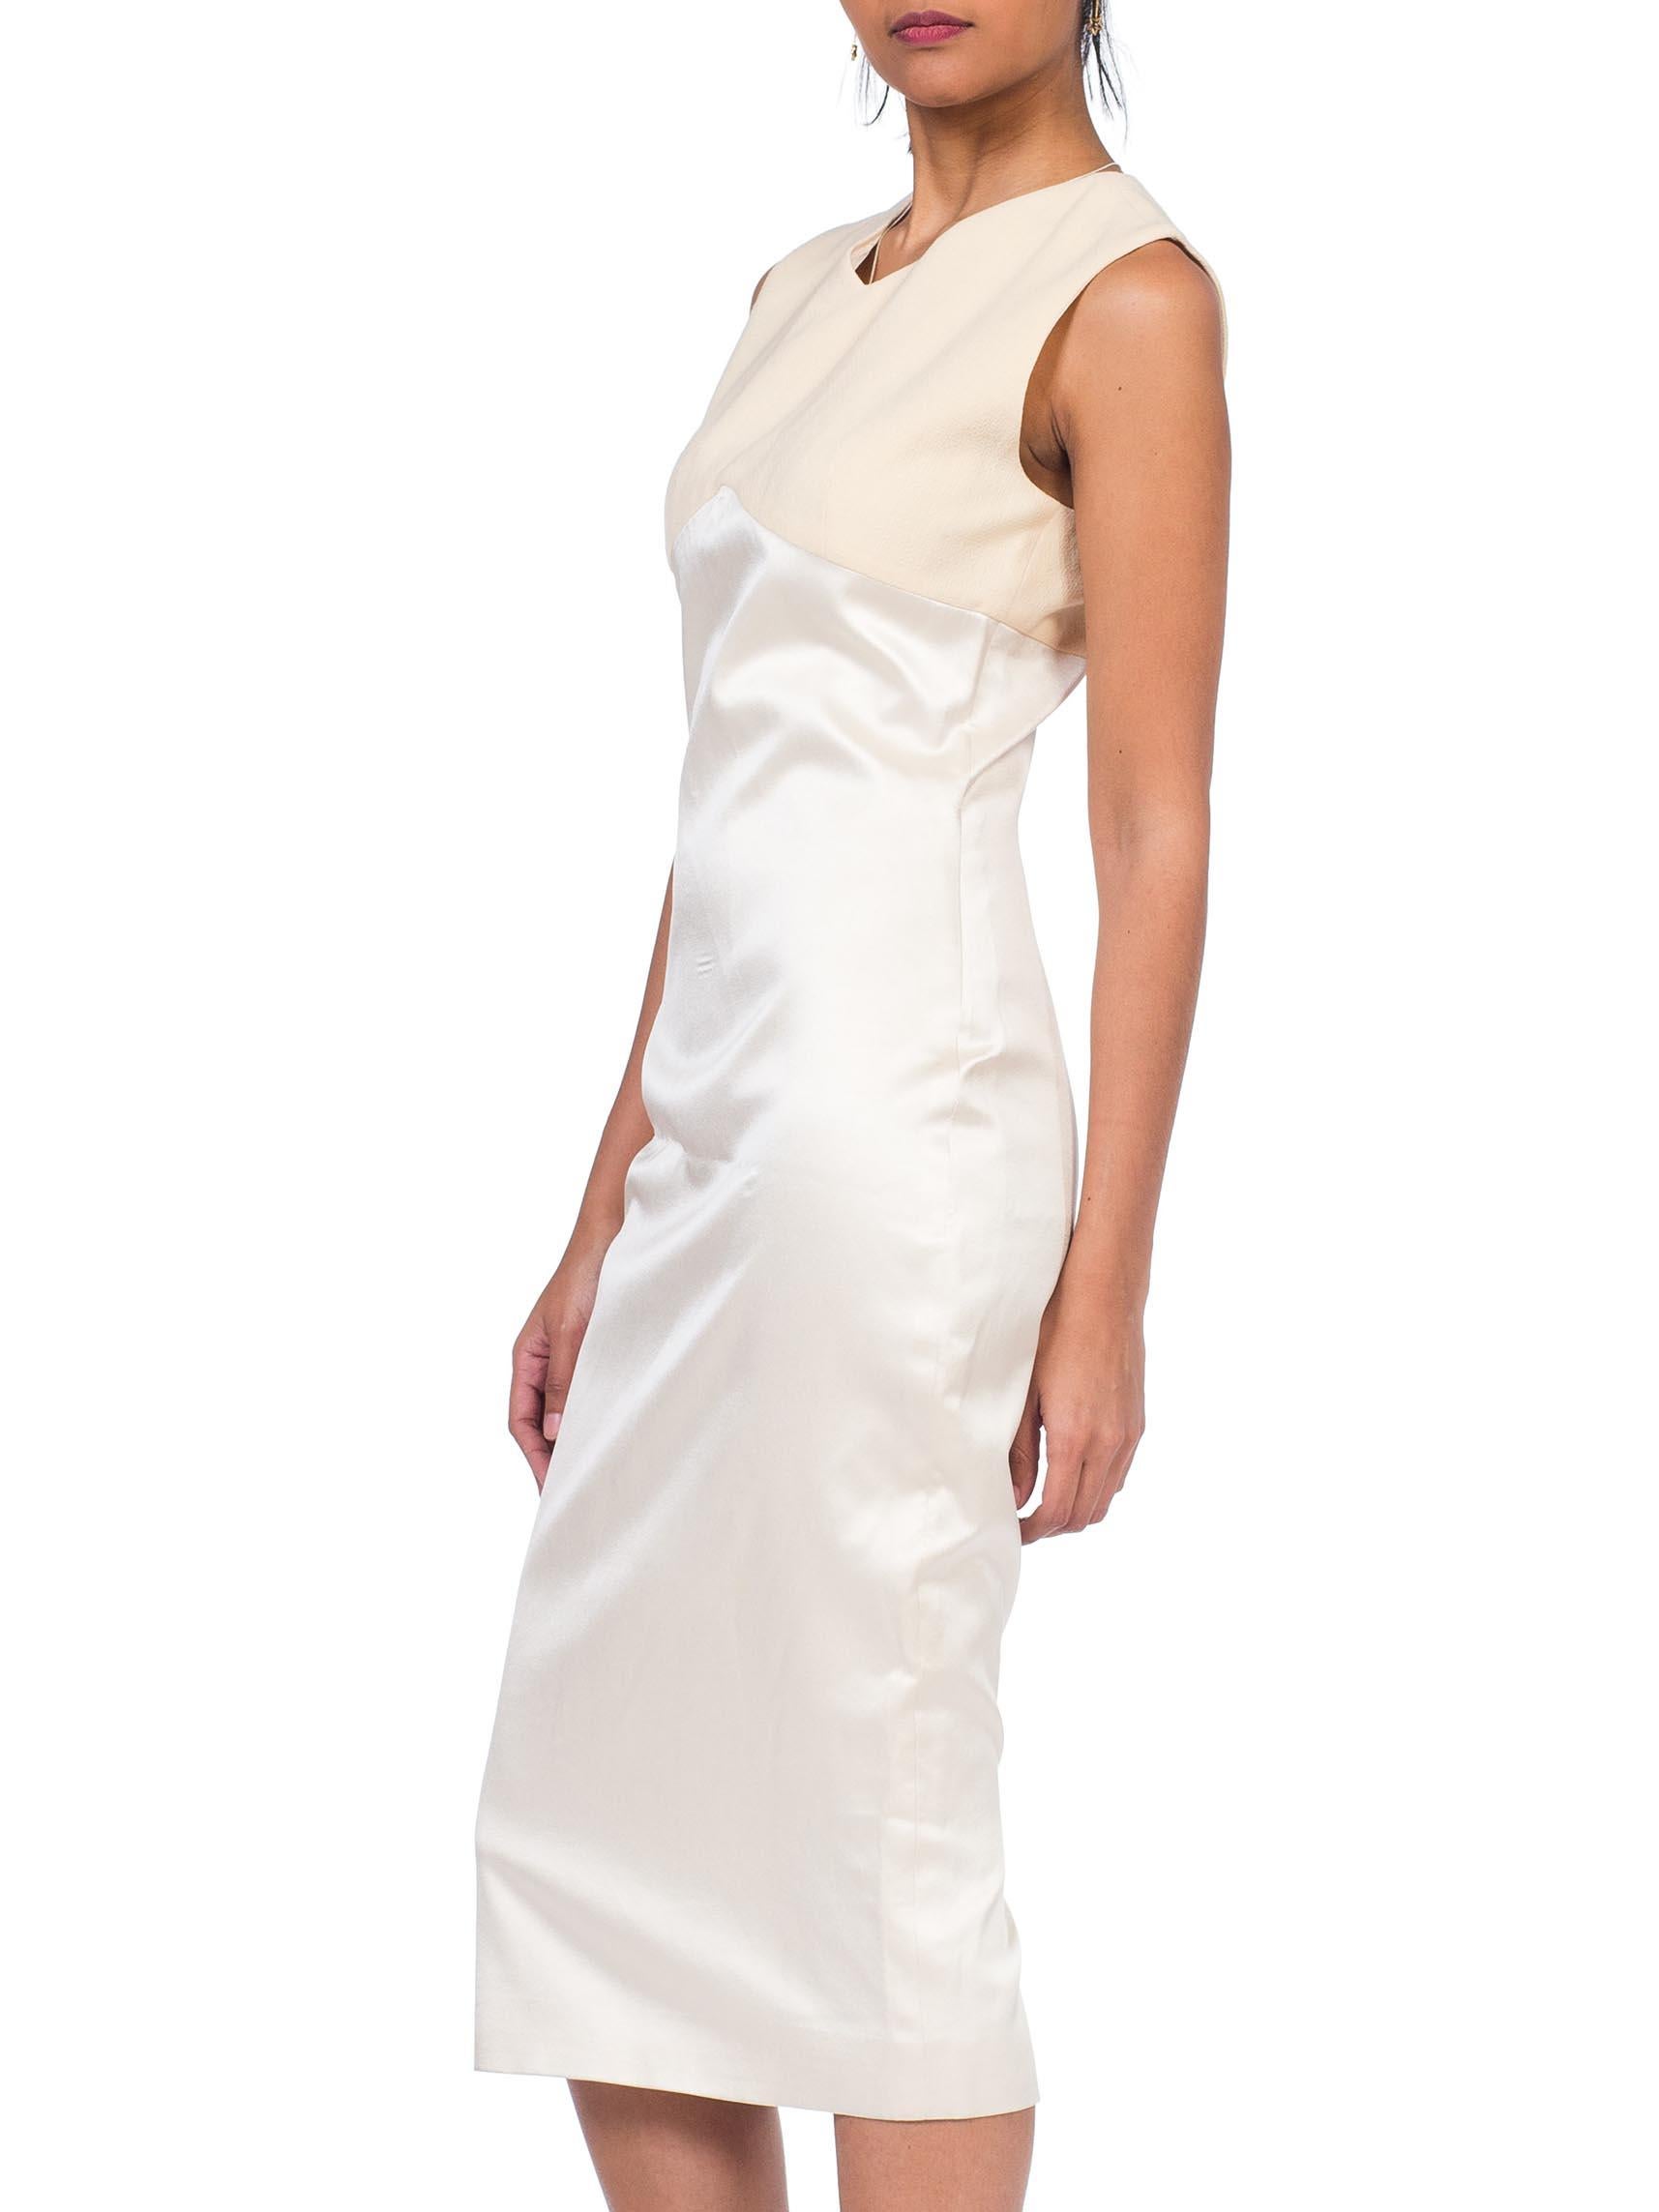 Gray 1990S GIANNI VERSACE Cream Silk Satin Sharply Fitted Dress With Stretch Wool At For Sale